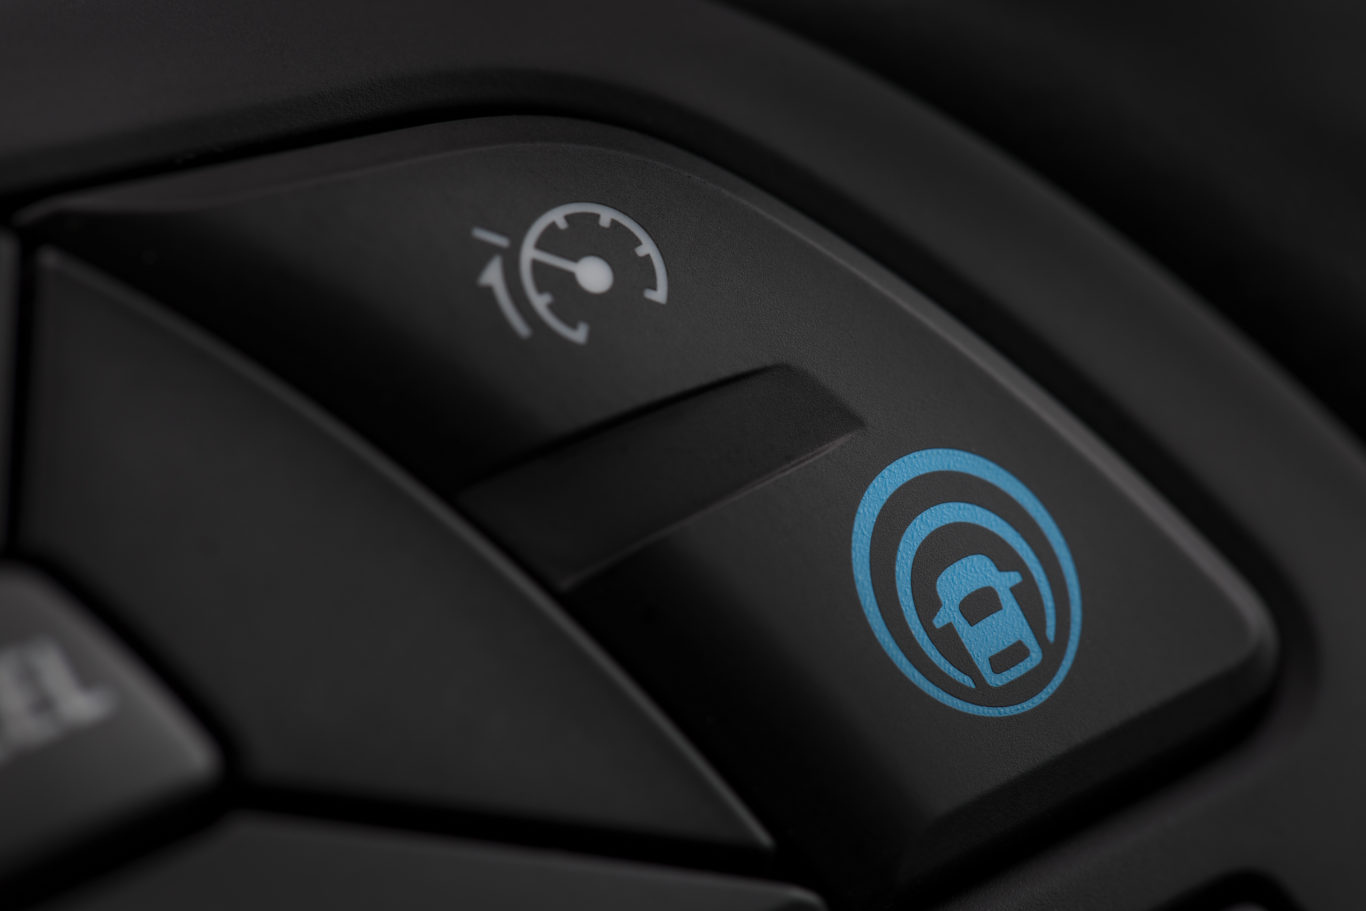 The ProPilot system gets a dedicated button on the steering wheel